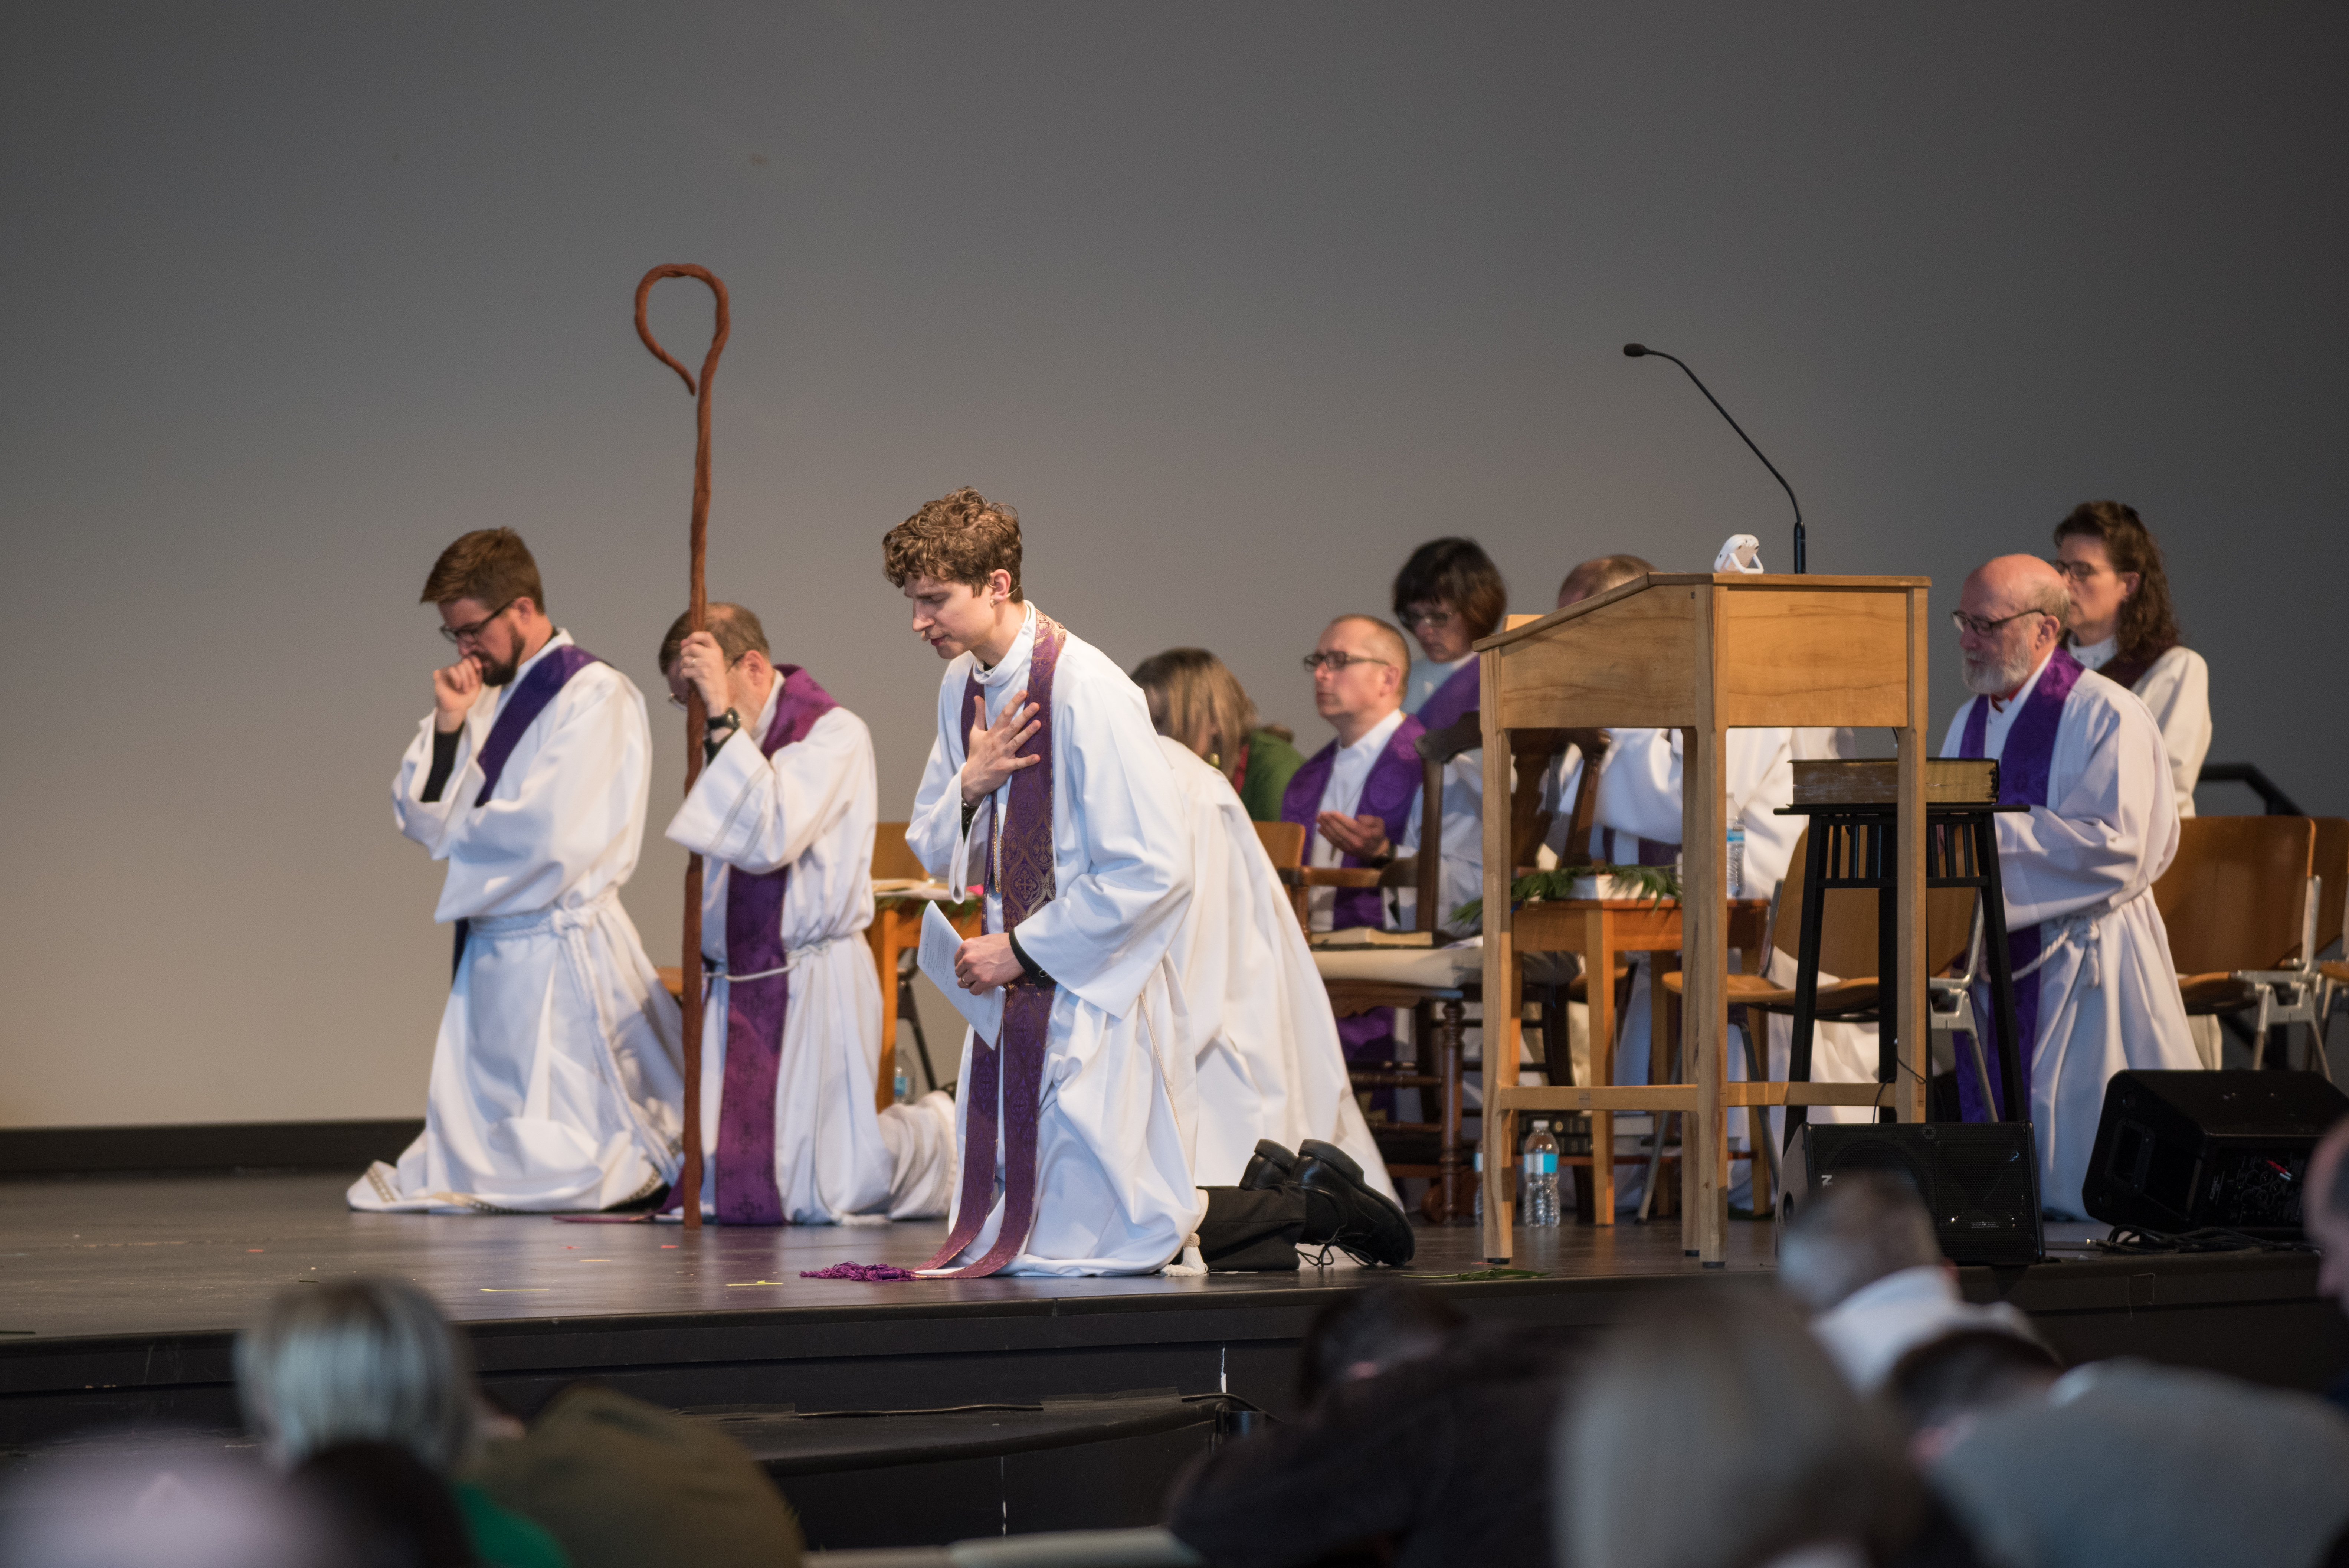 Kneeling clergy in robes on church stage